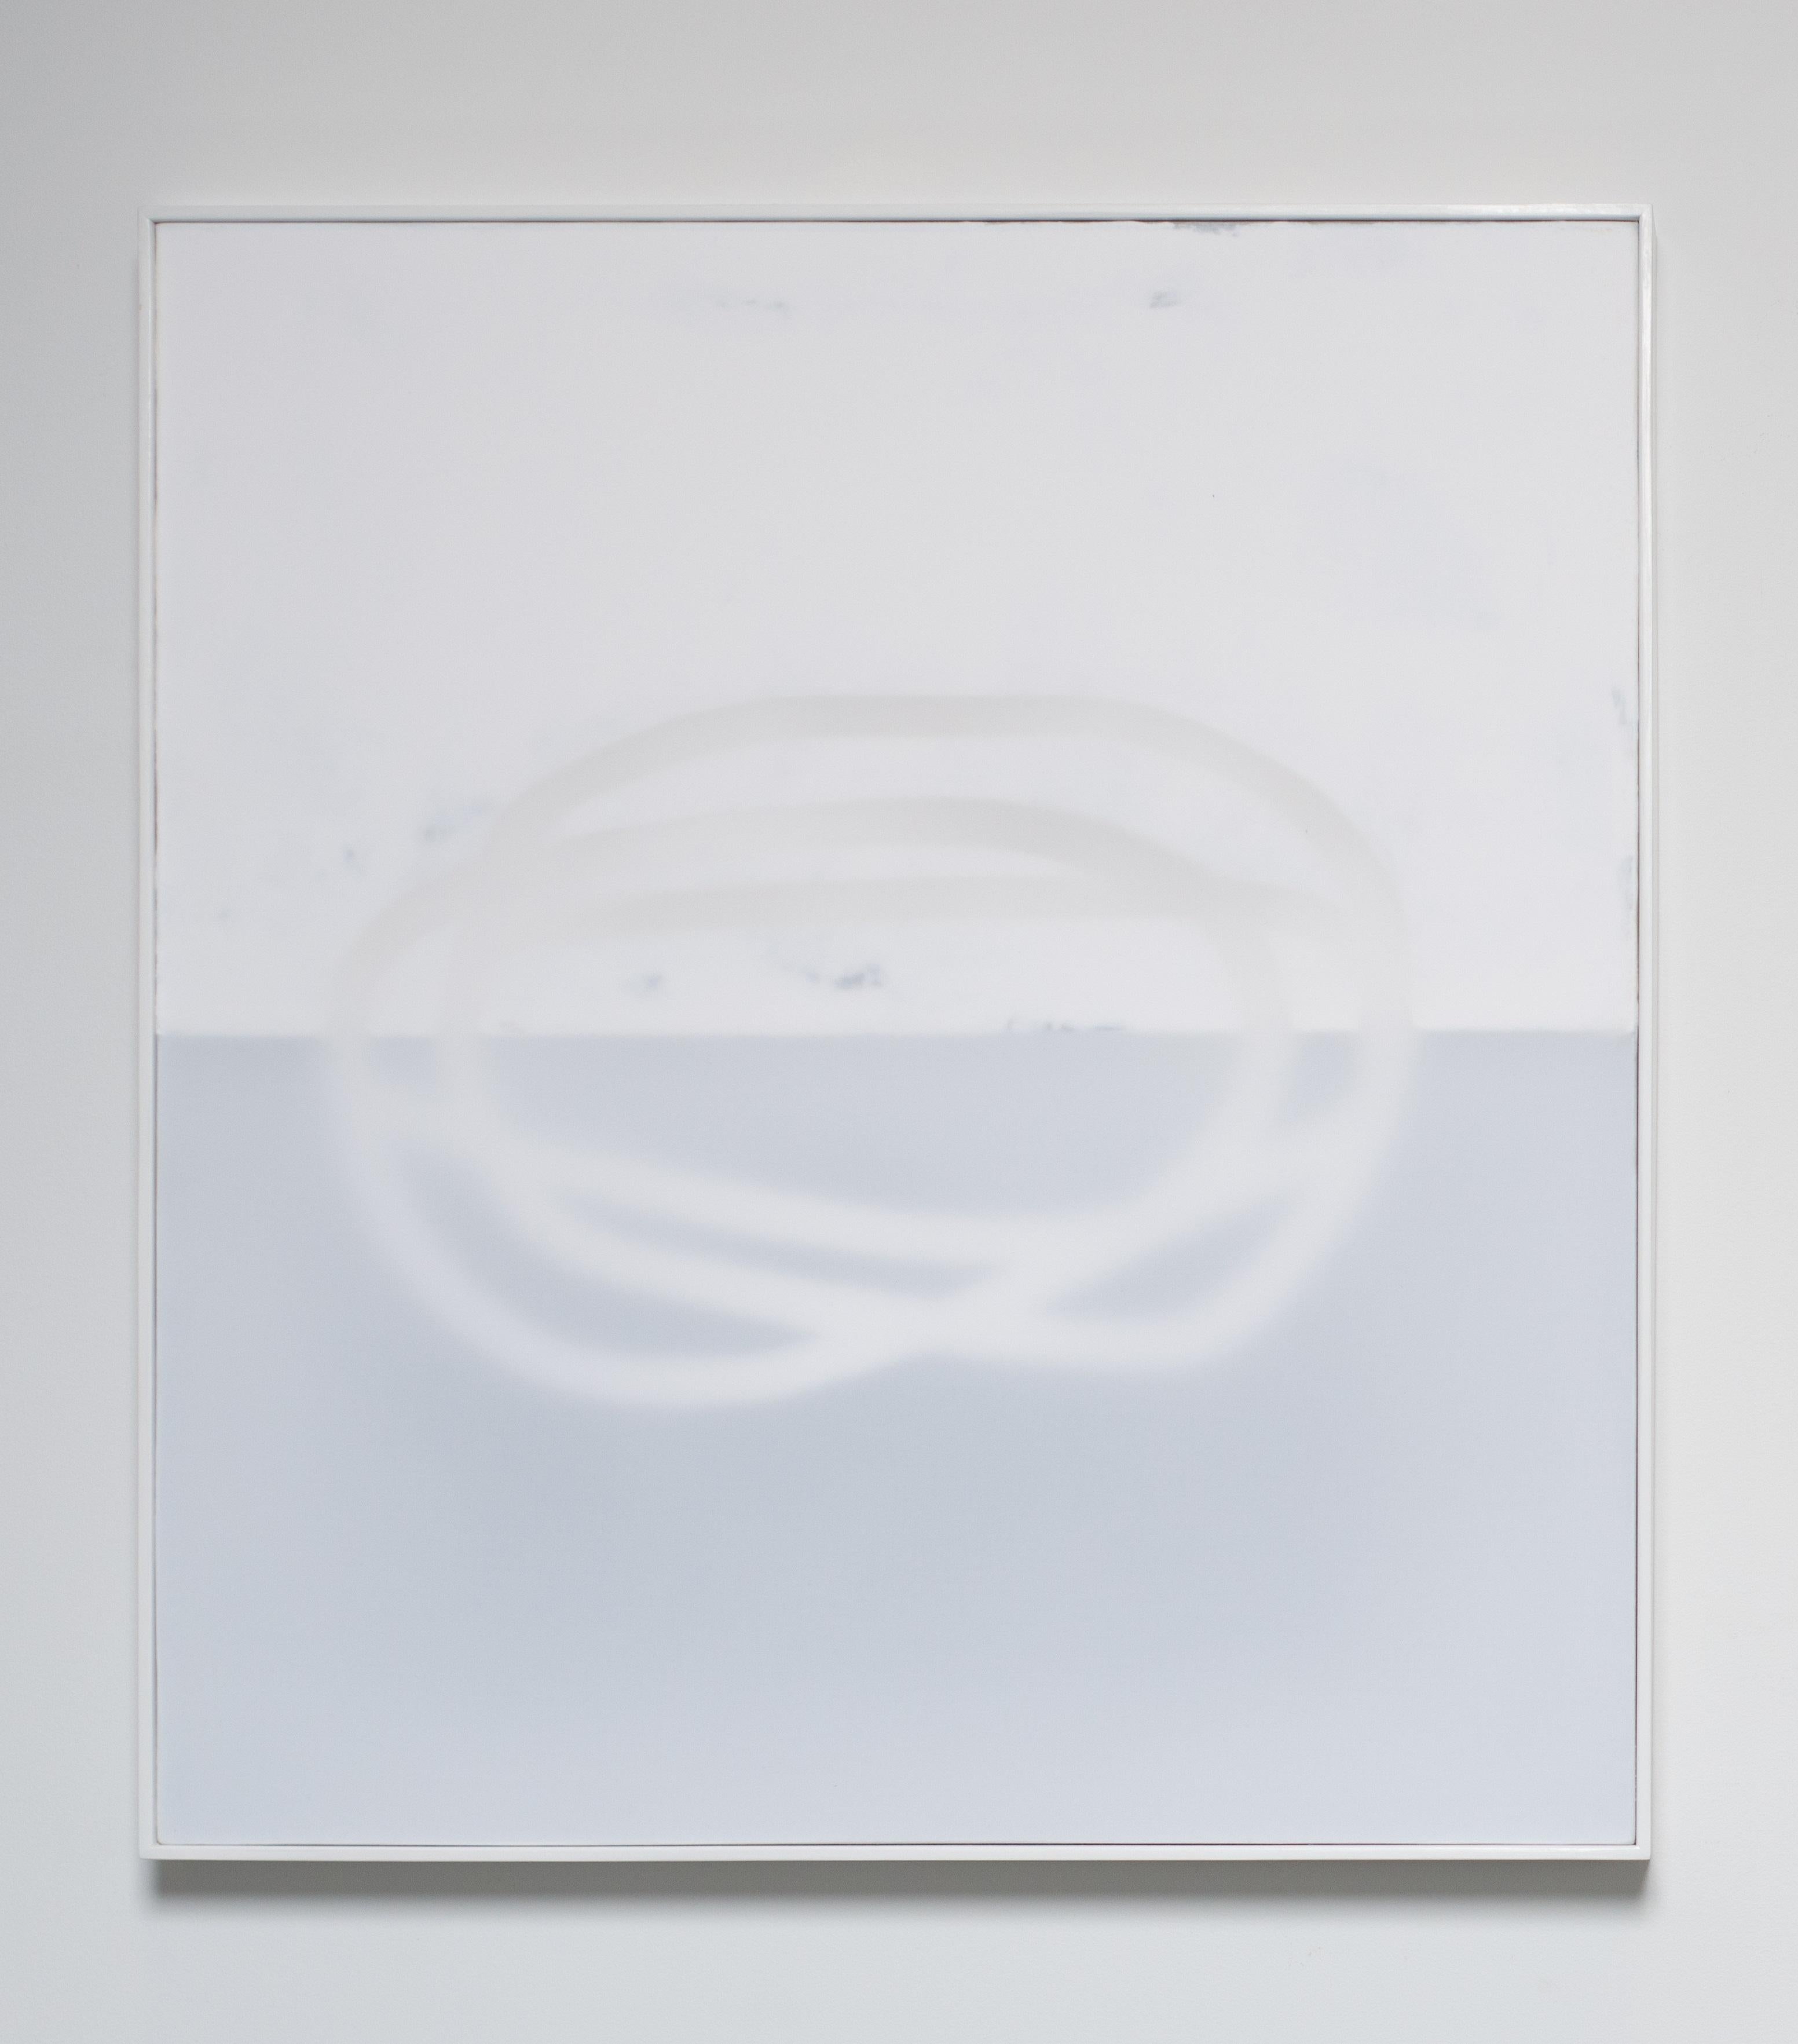 White on White, Small, Minimalist, Abstract Painting on Canvas - Contemporary Mixed Media Art by Udo Noger